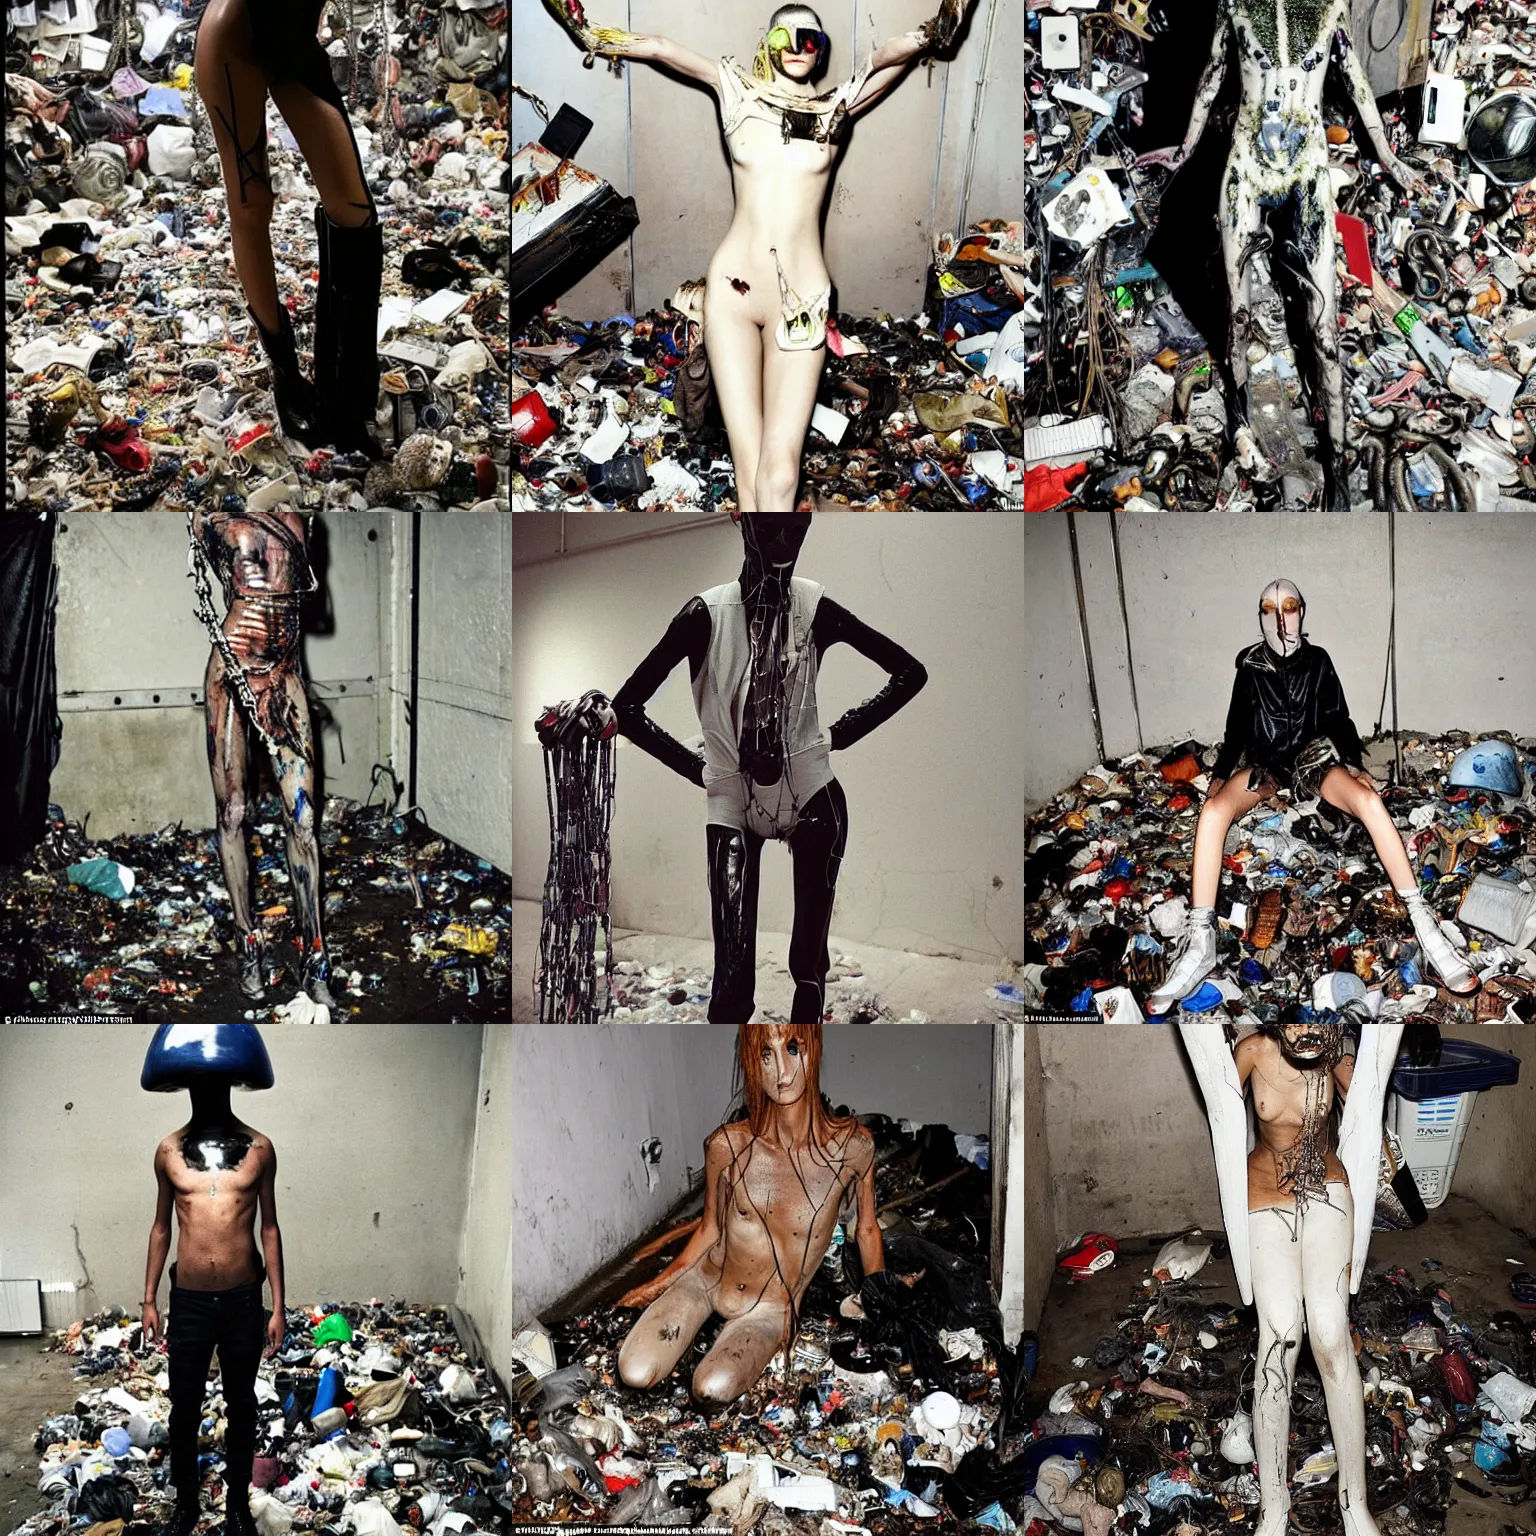 Prompt: alien high-fashion model by Juergen Teller in a dark small filthy concrete room full of garbage and trash and network cables cables cables chains chains chains everywhere